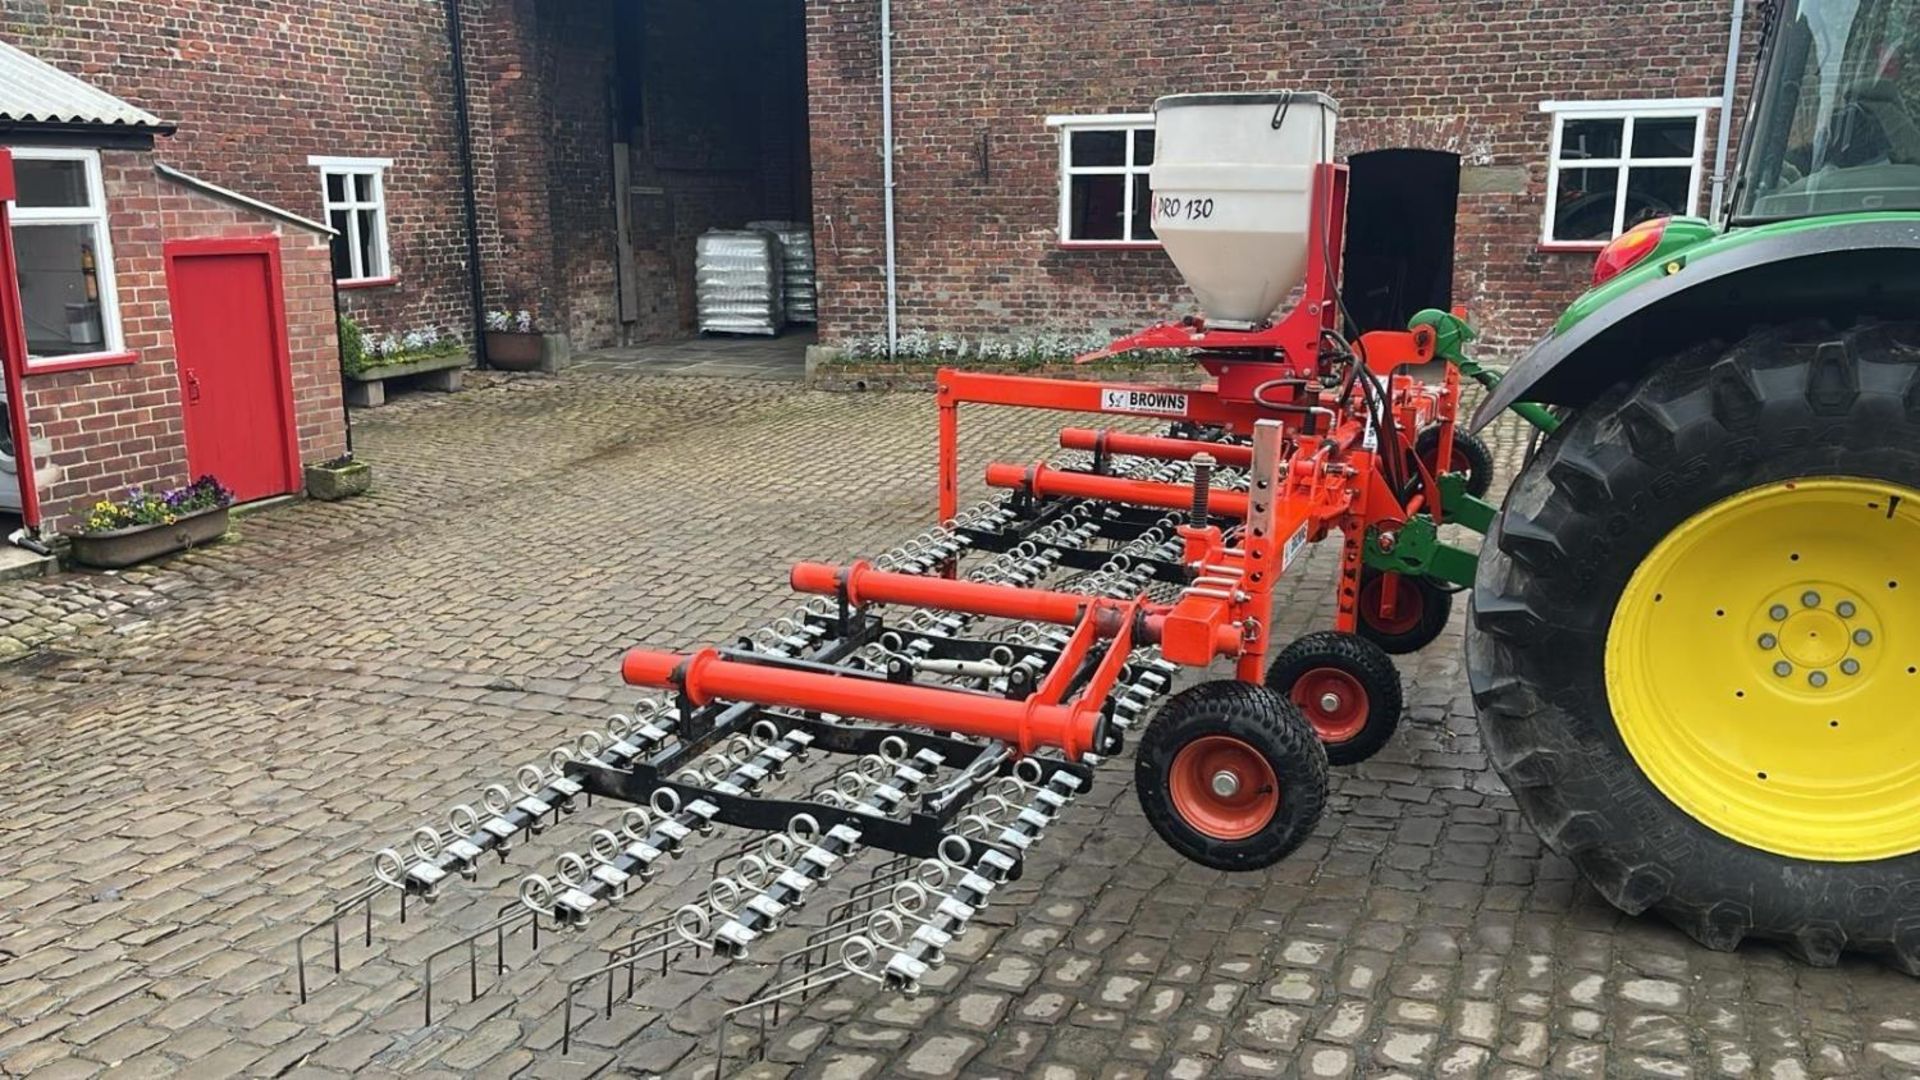 BROWNS GRASSMASTER SPRING TINE GRASS HARROWS WITH STOCKS FAN JET PRO 130 AIR SEEDER SERIAL NUMBER - Image 3 of 11